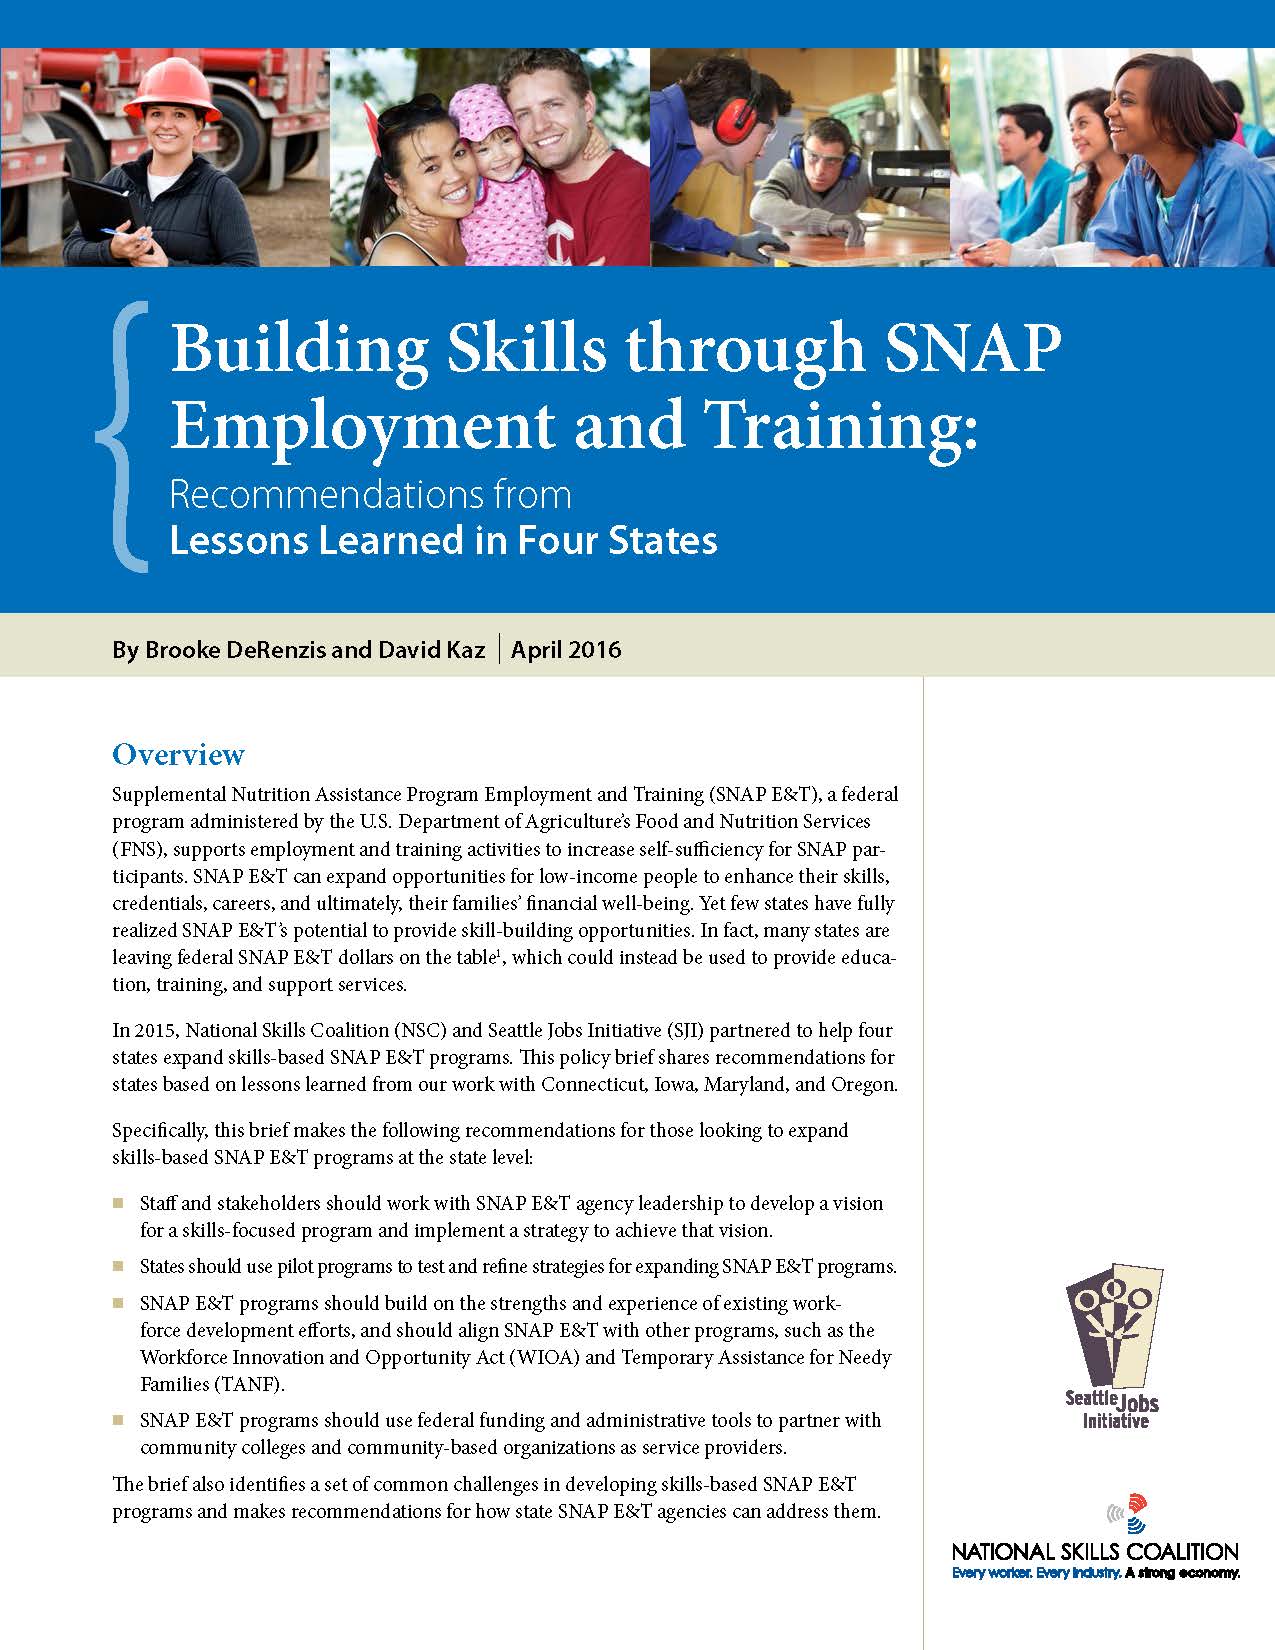 NSC Releases Recommendations on Building Skills through SNAP E&T